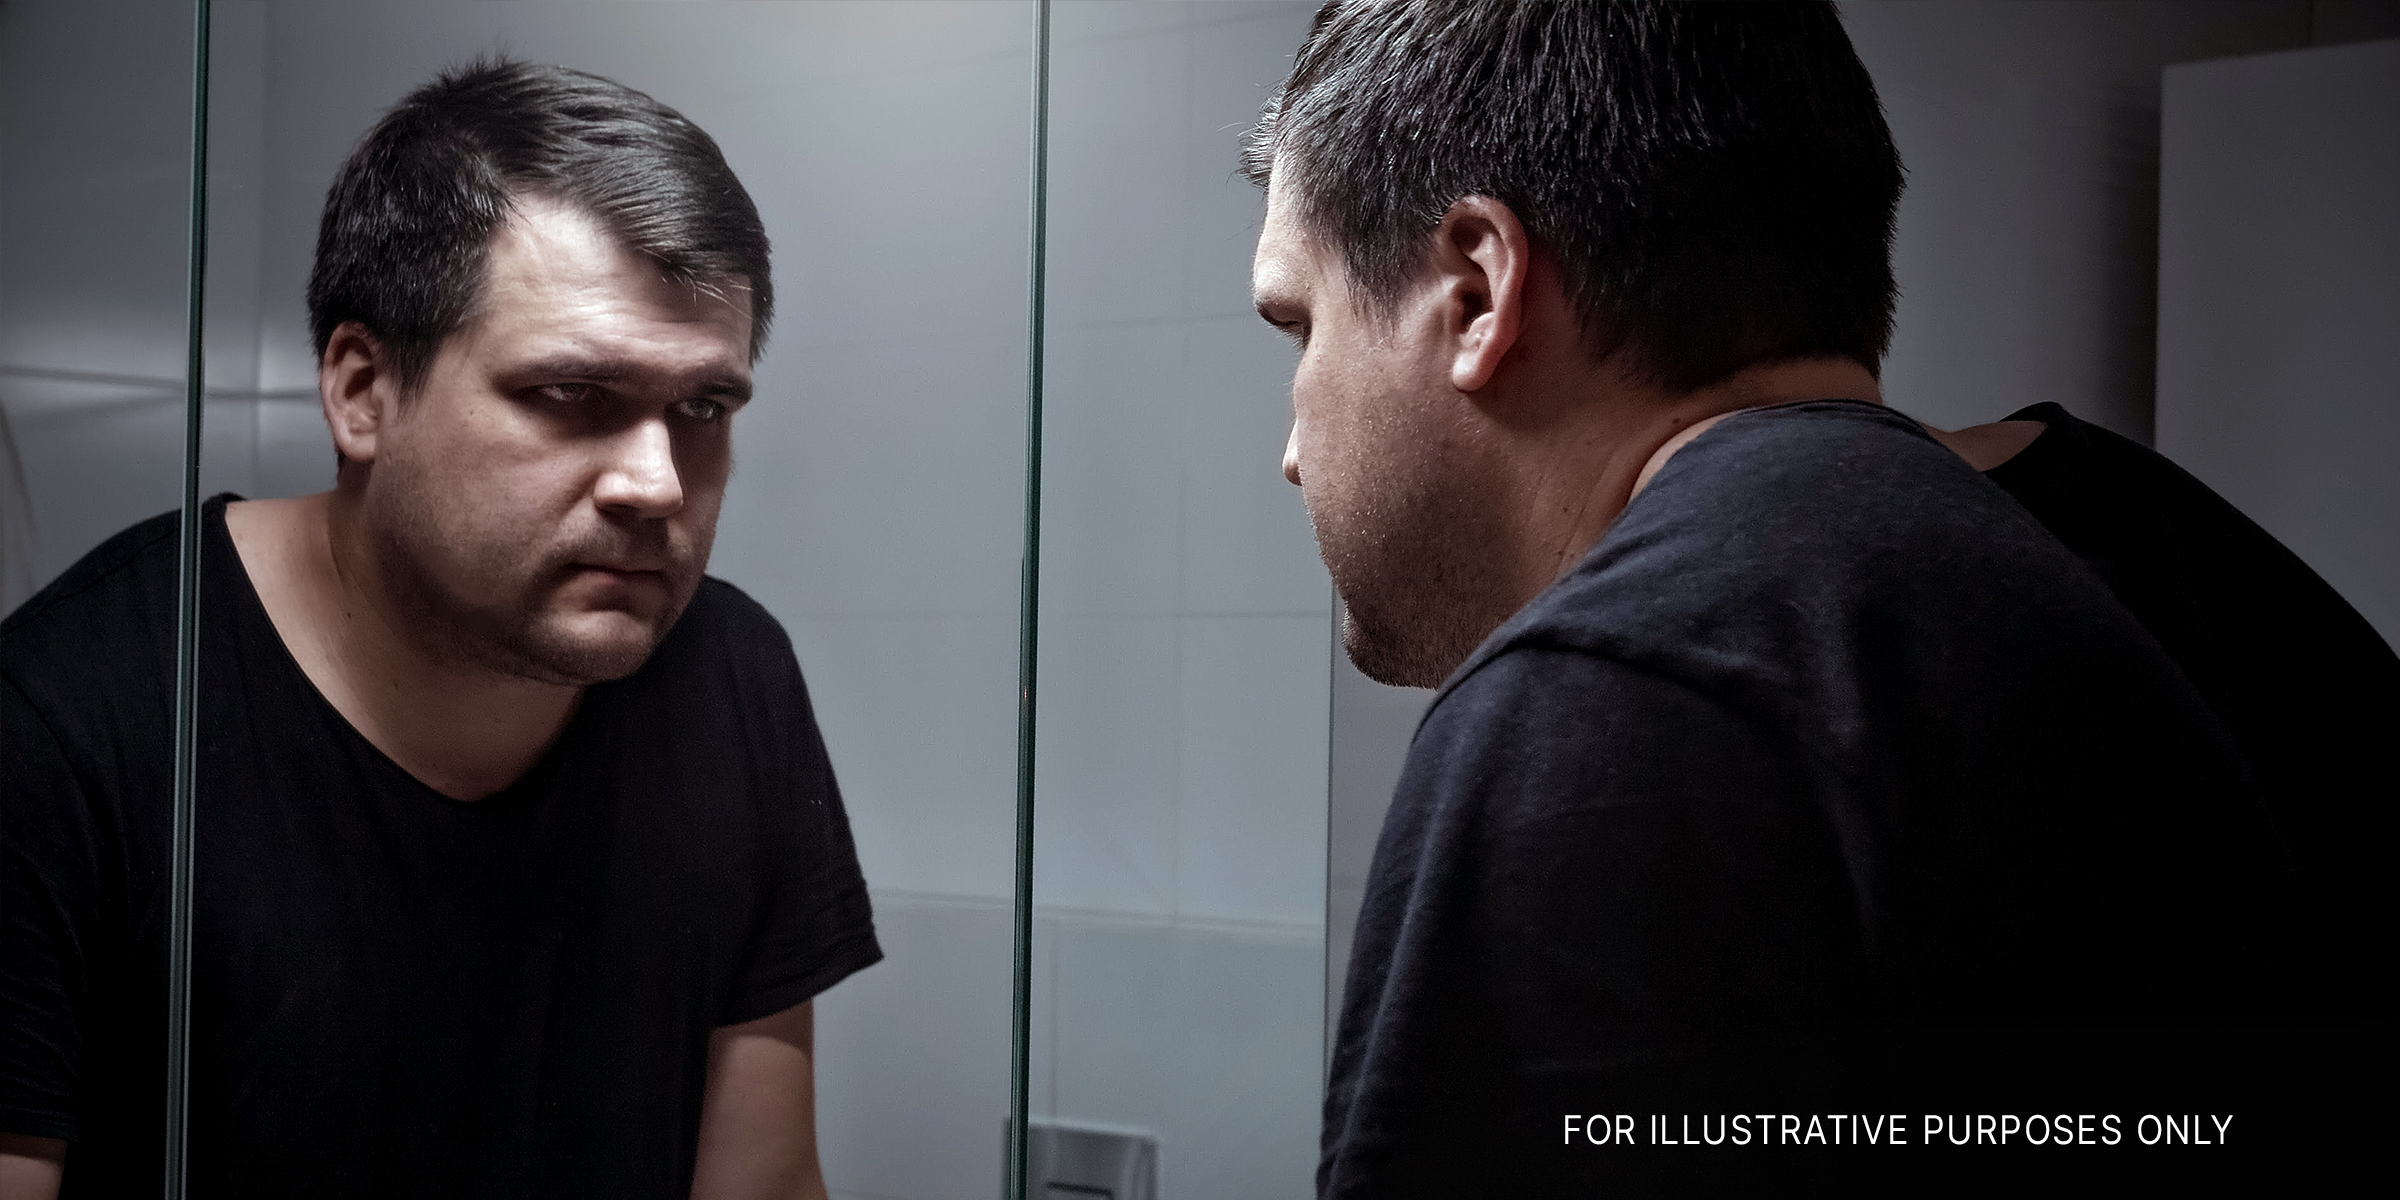 A man looking at himself in the mirror | Source: Shutterstock